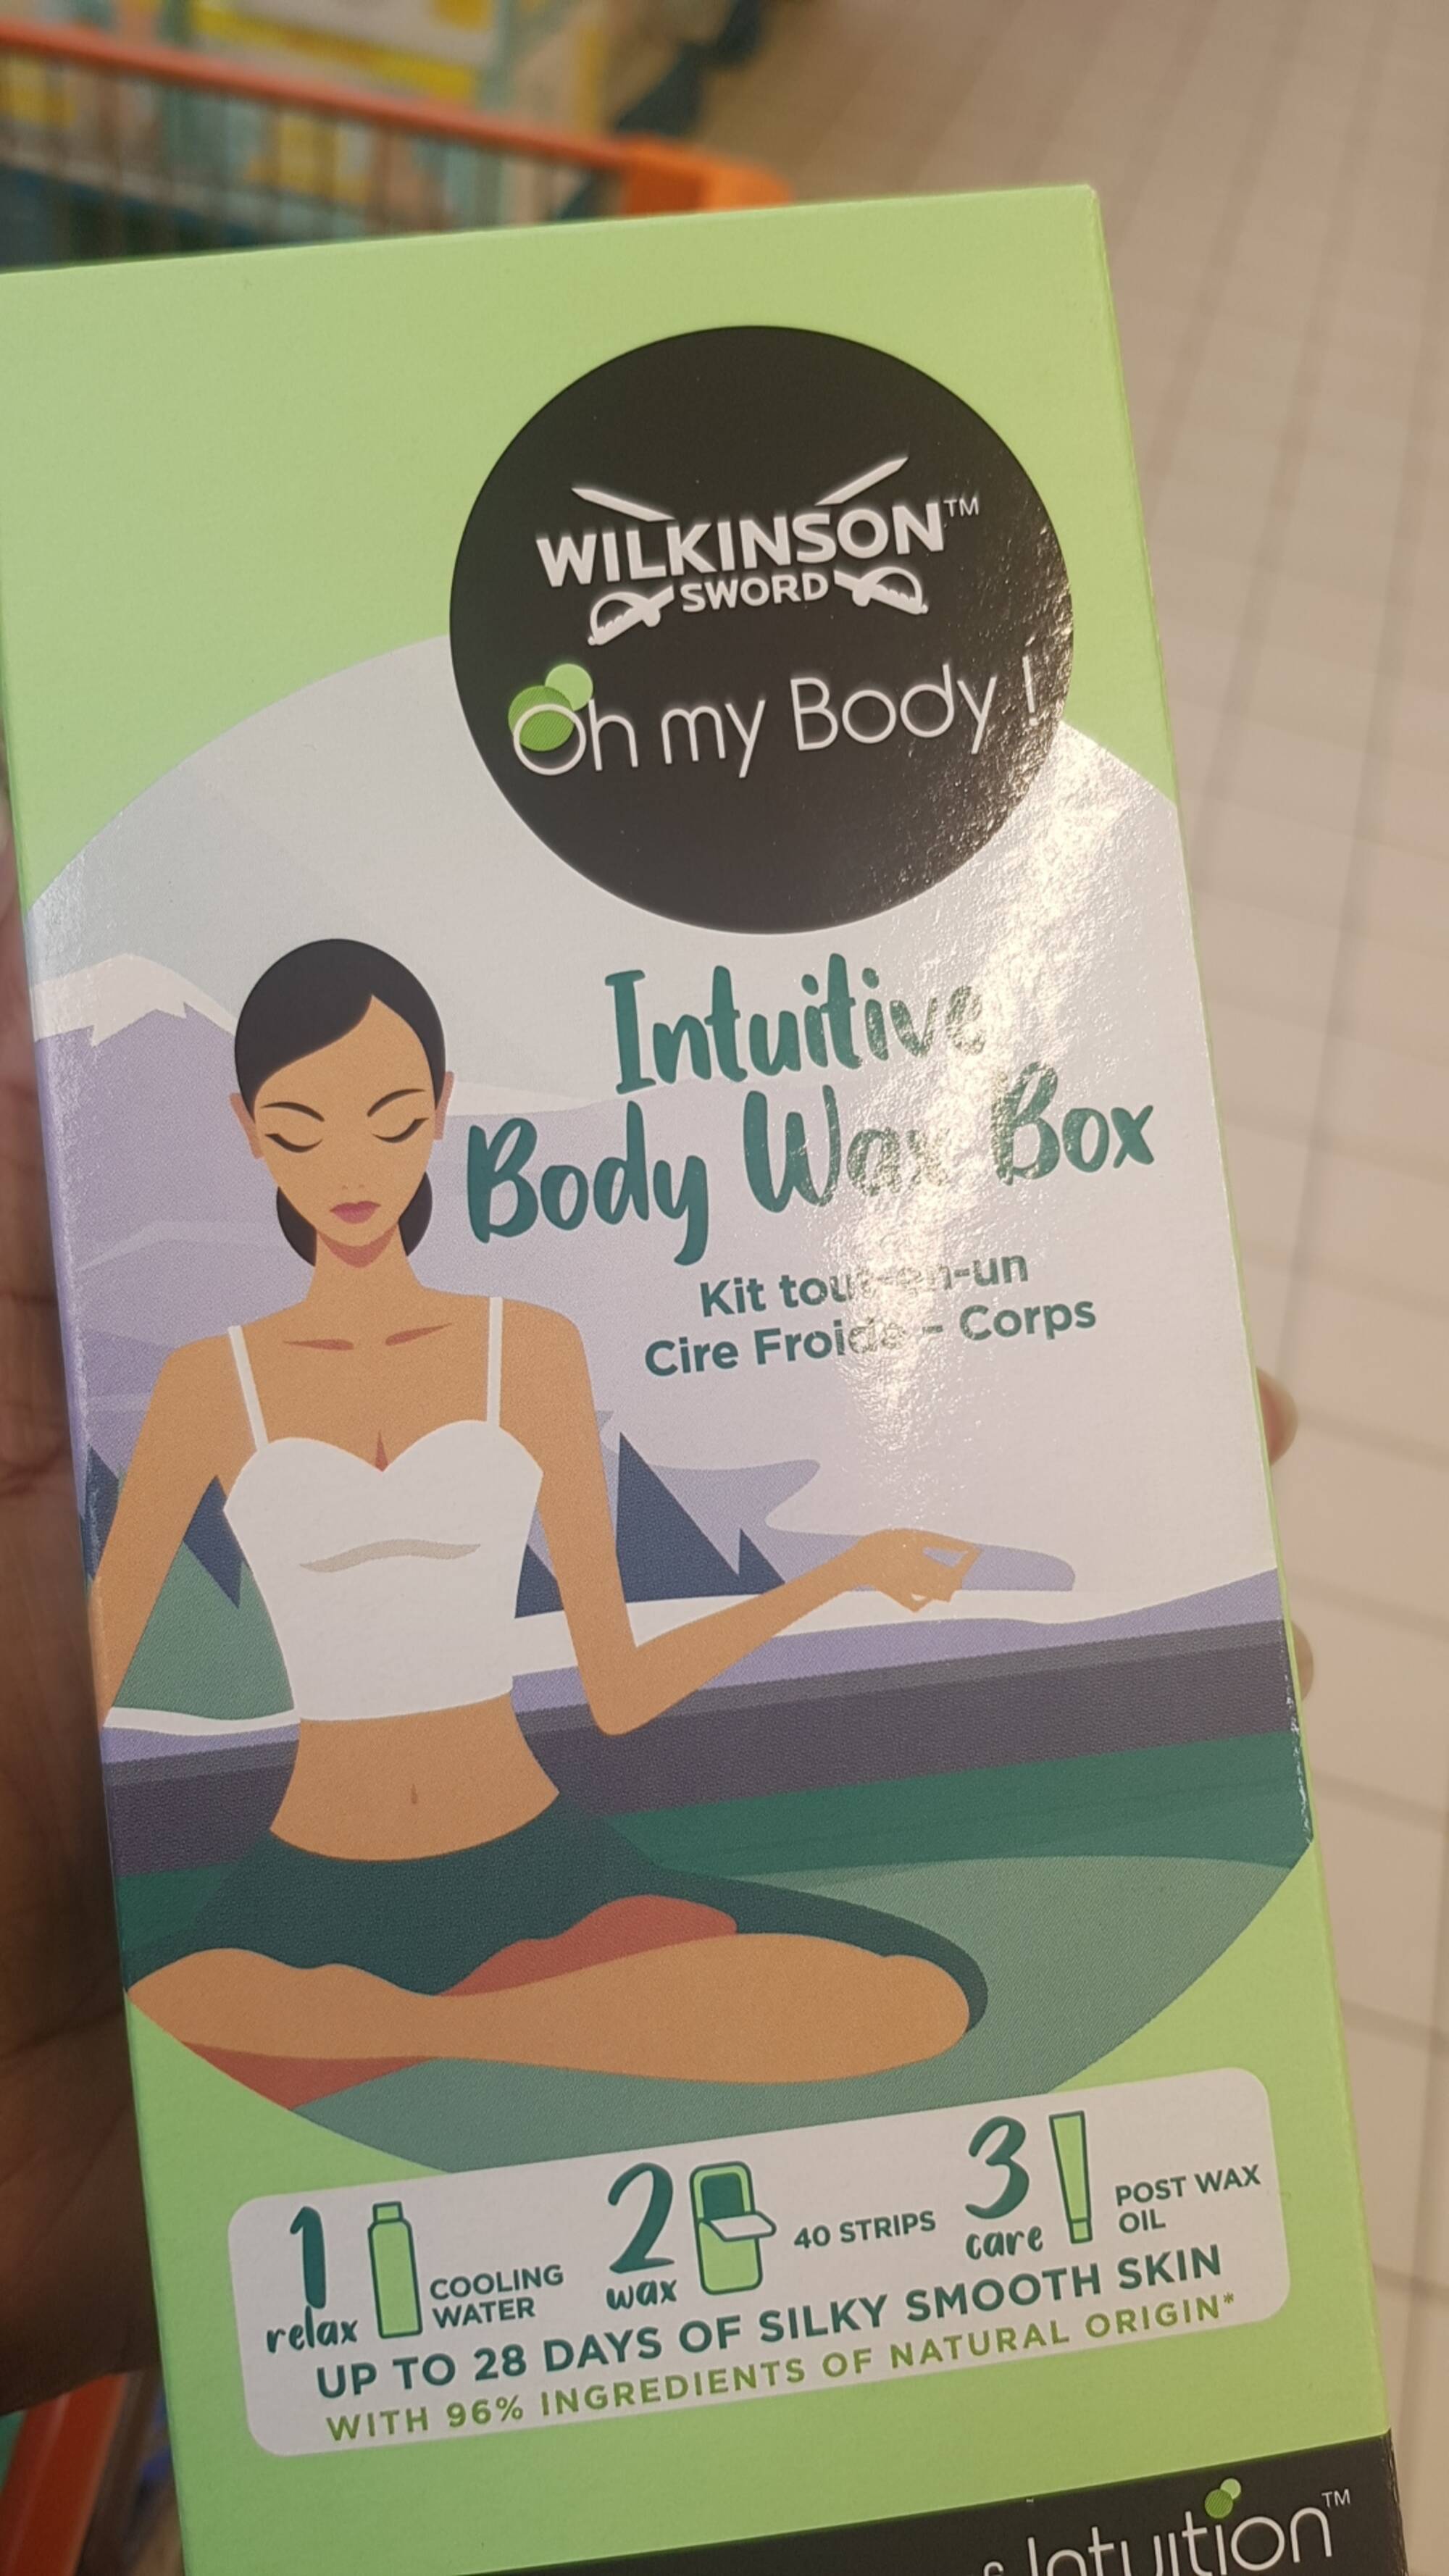 WILKINSON - Intuitive body wax-box - Cire froide-corps